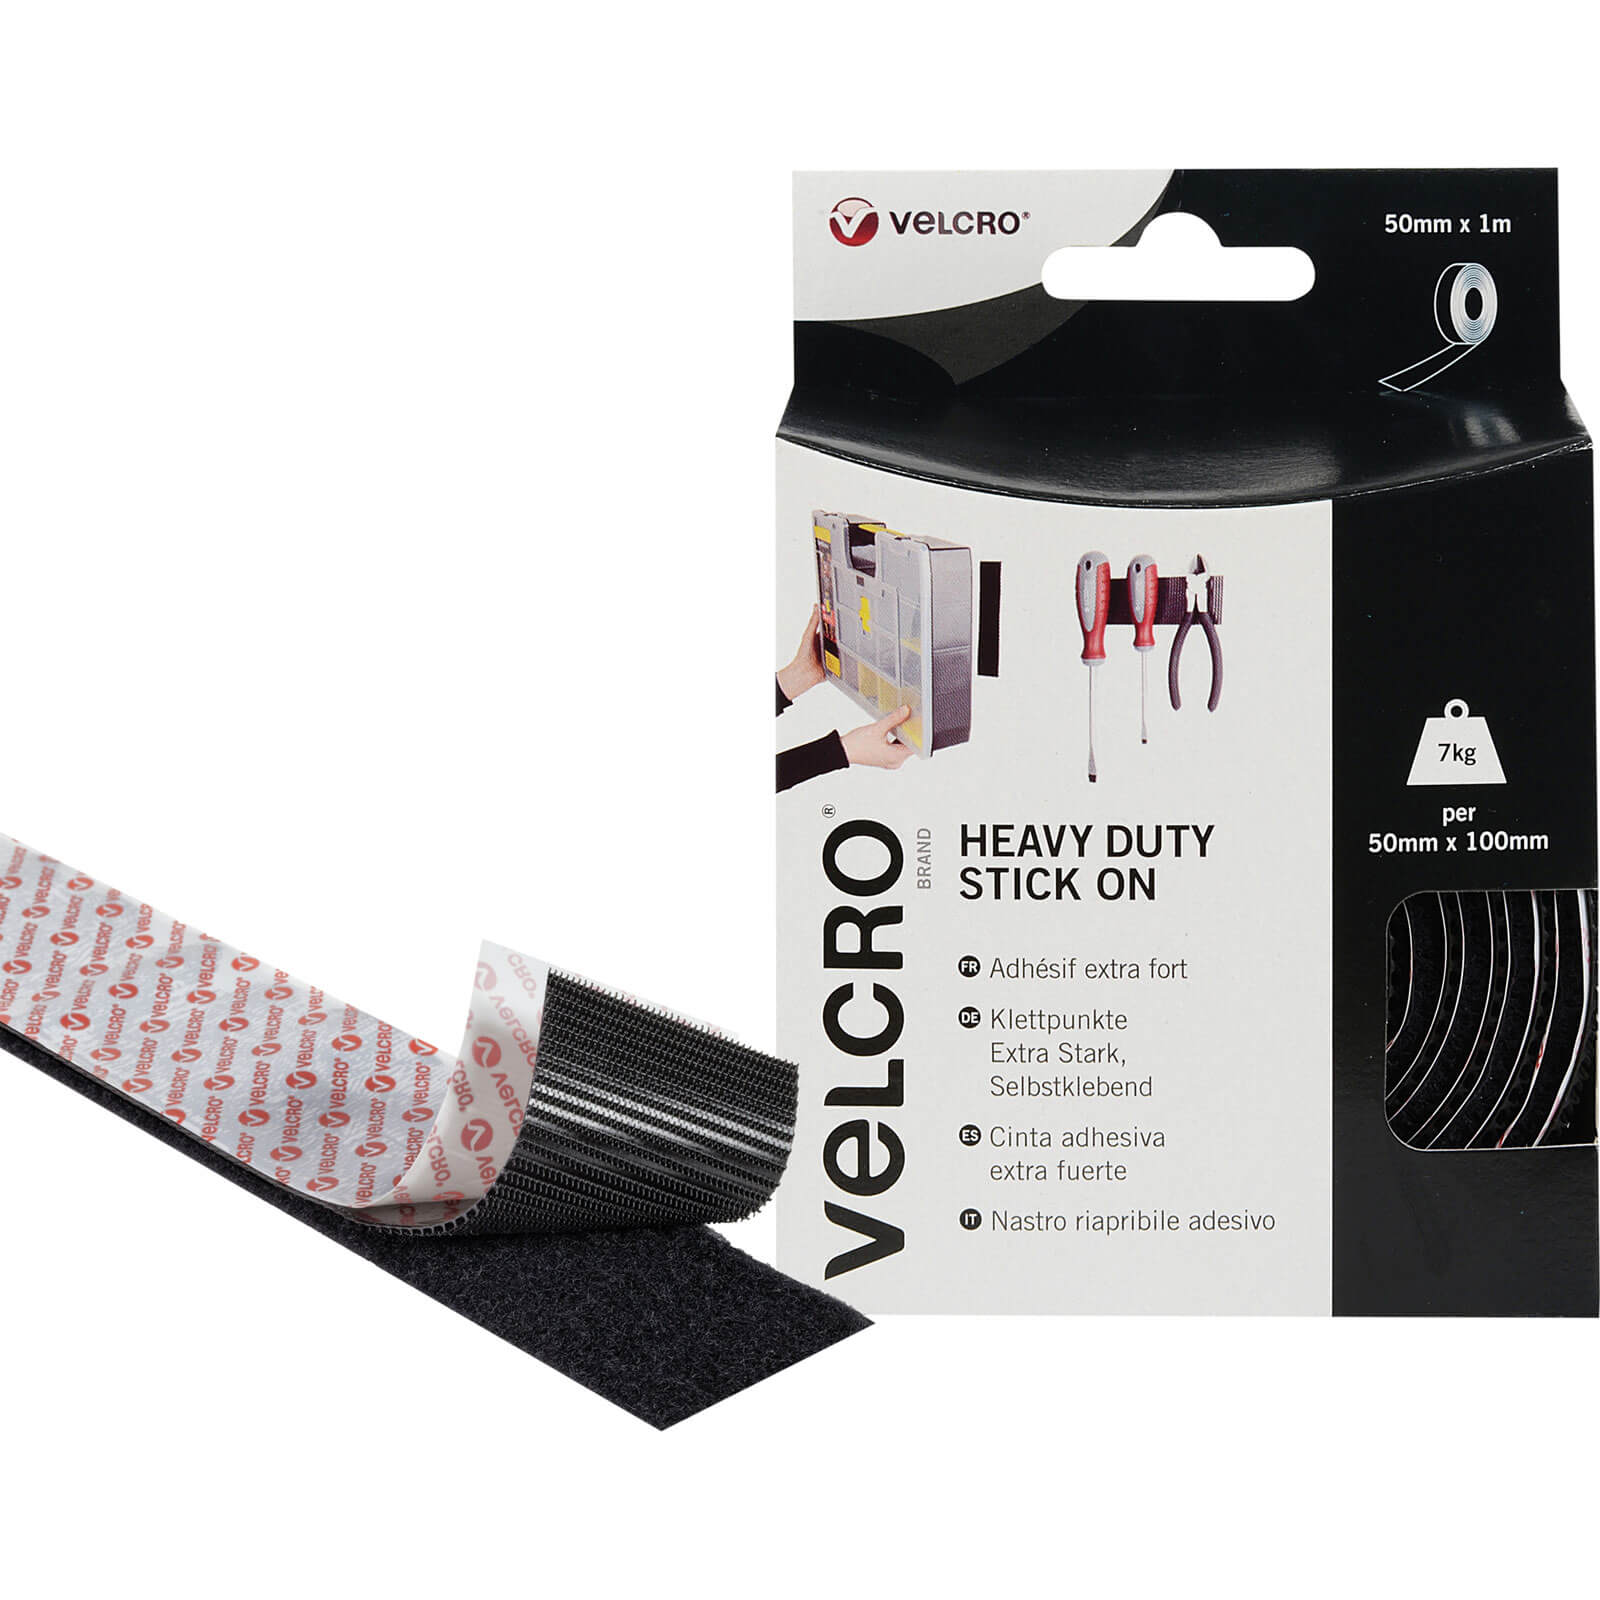 Image of Velcro Heavy Duty Stick On Tape Black 50mm 1m Pack of 1